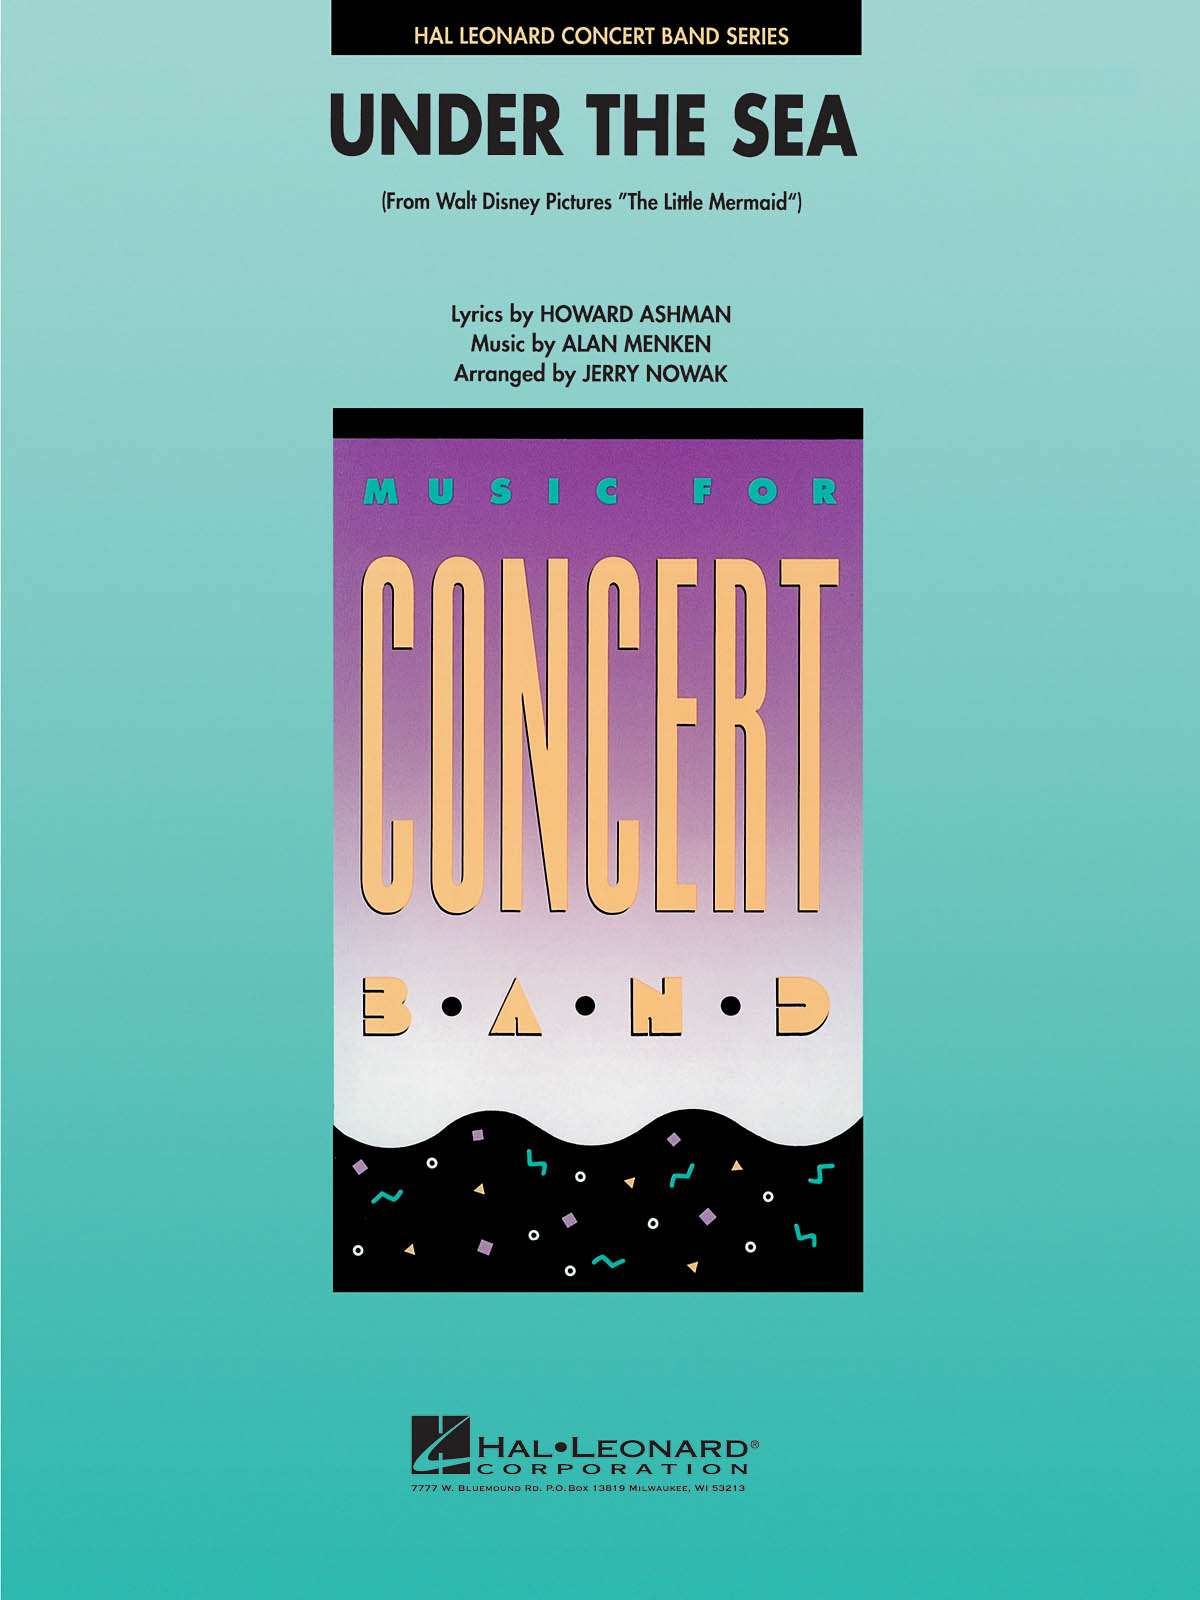 Under the Sea: Concert Band: Score